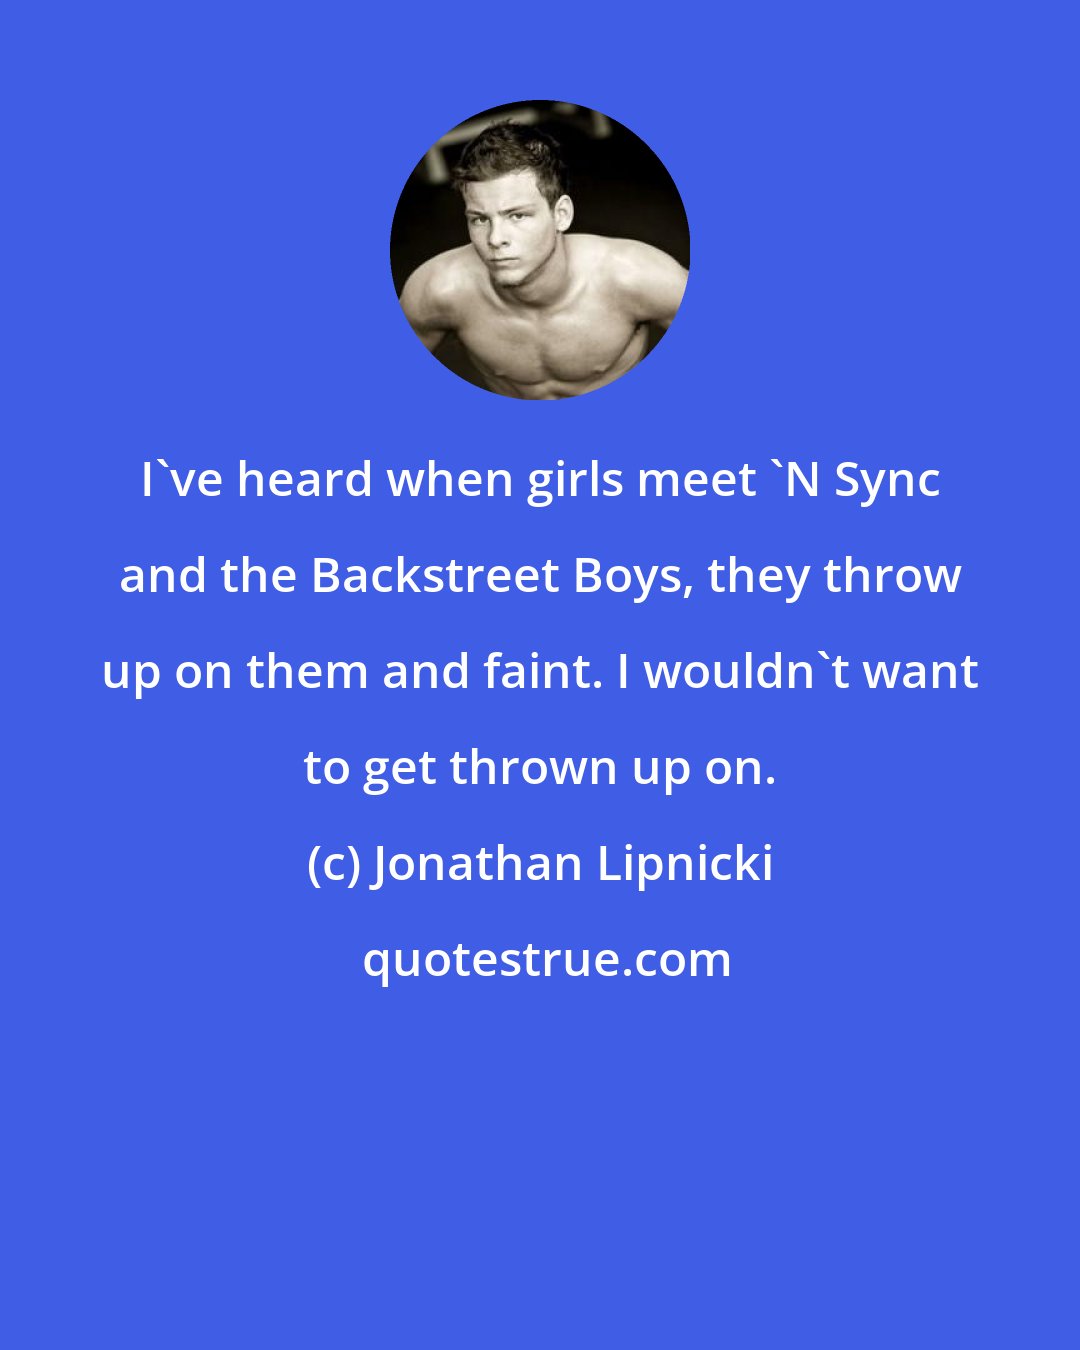 Jonathan Lipnicki: I've heard when girls meet 'N Sync and the Backstreet Boys, they throw up on them and faint. I wouldn't want to get thrown up on.